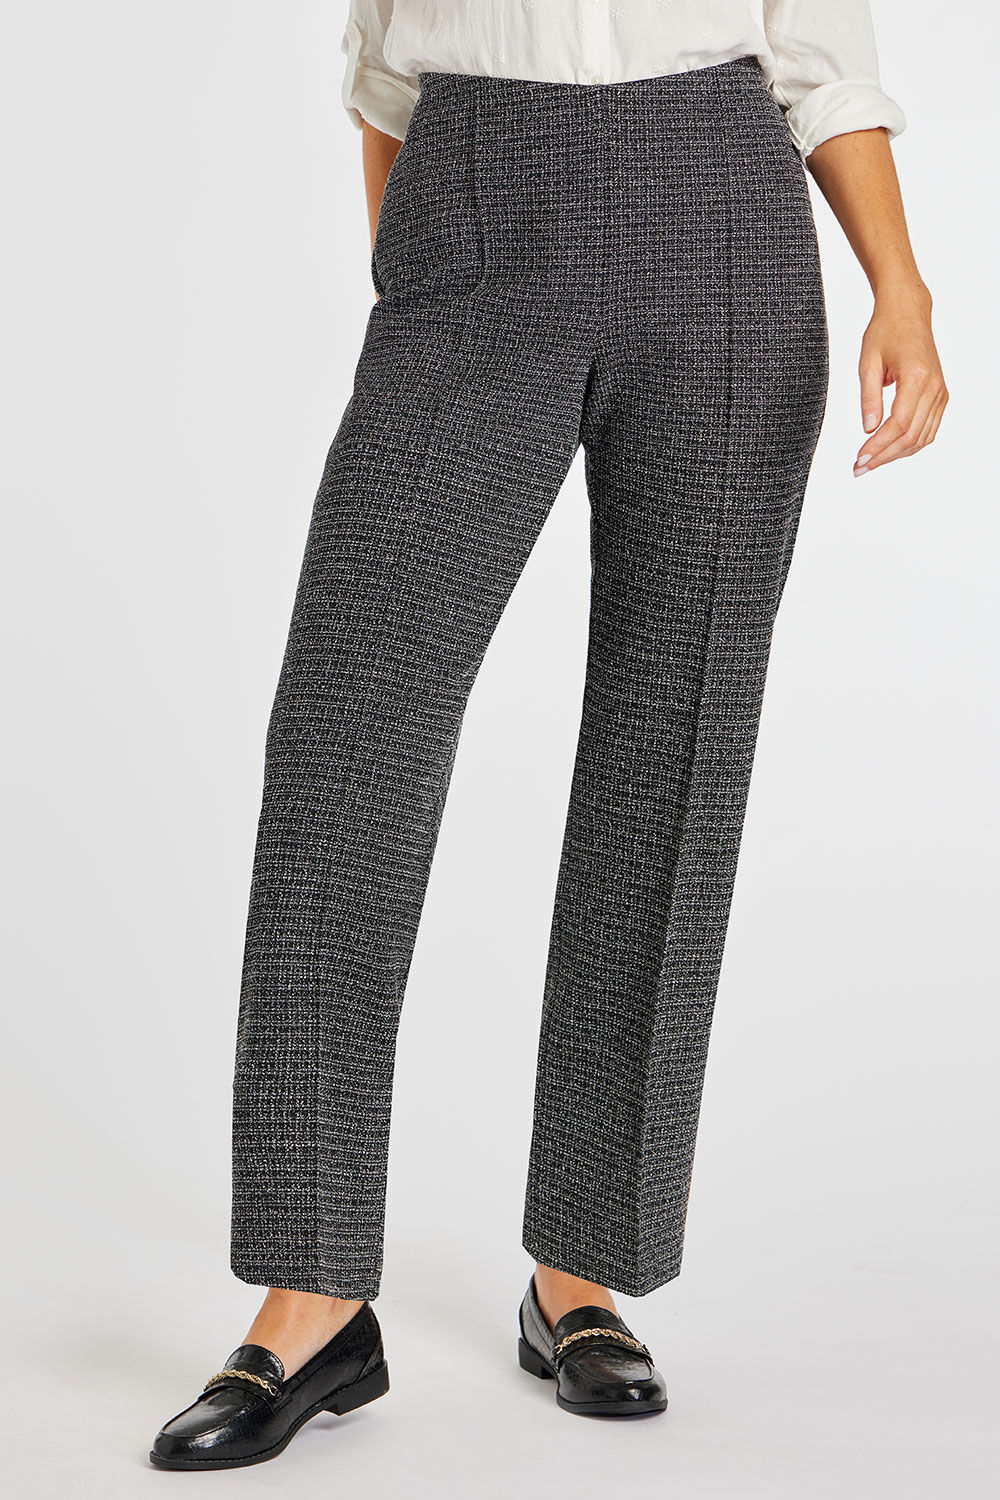 Bonmarche Grey Checked Jacquard Pleated Front Elasticated Trousers, Size: 12